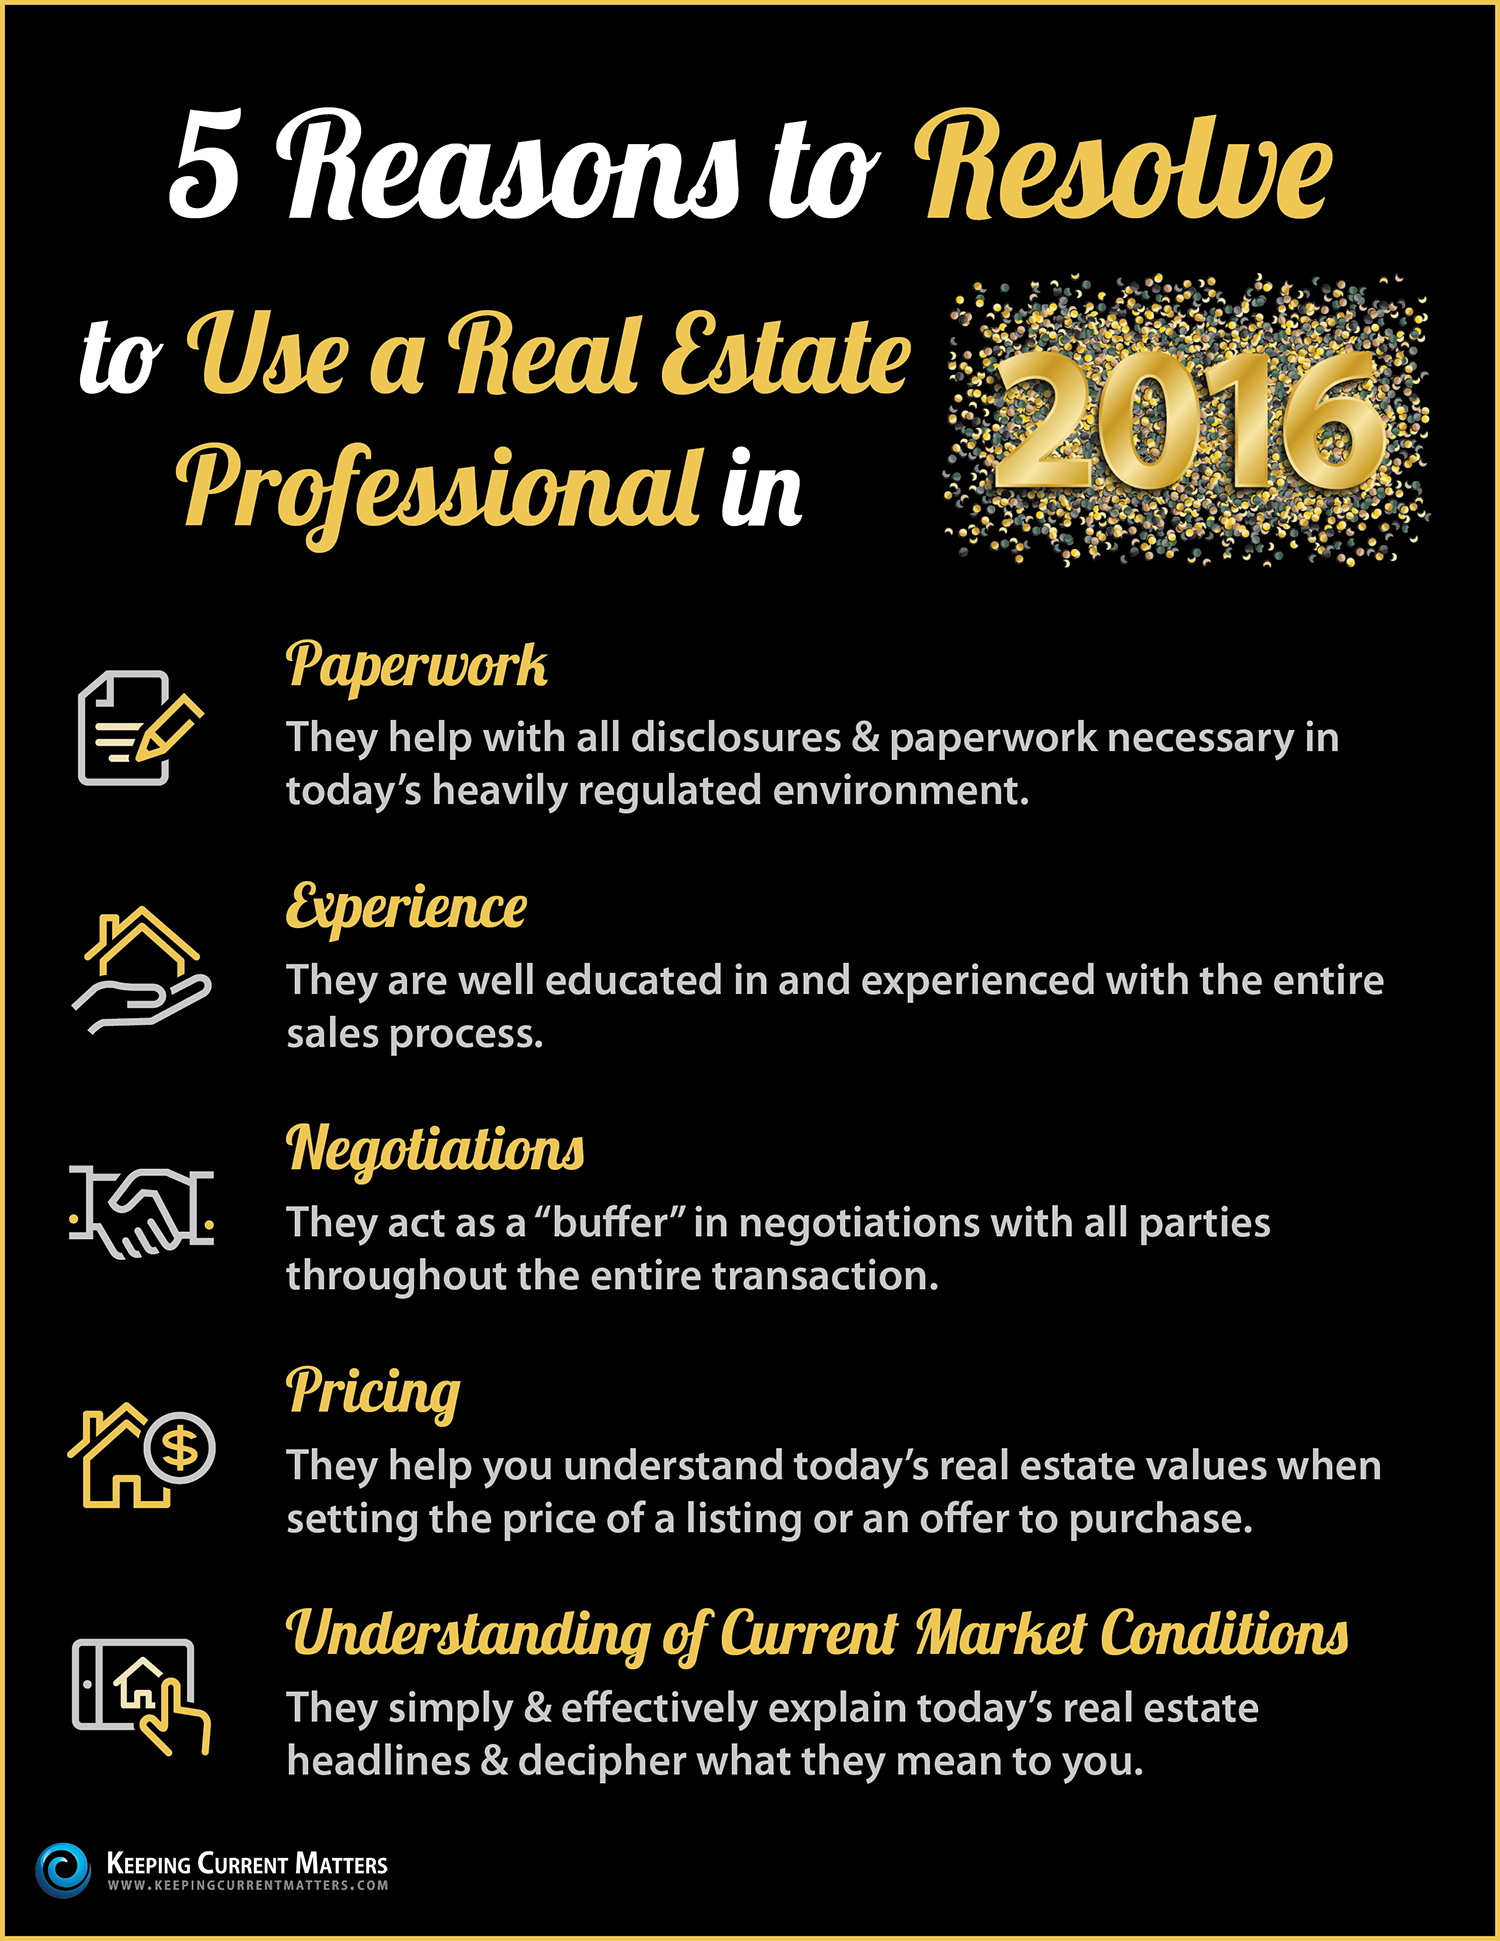 Resolve to Use a Real Estate Professional in 2016 [INFOGRAPHIC] | Keeping Current Matters